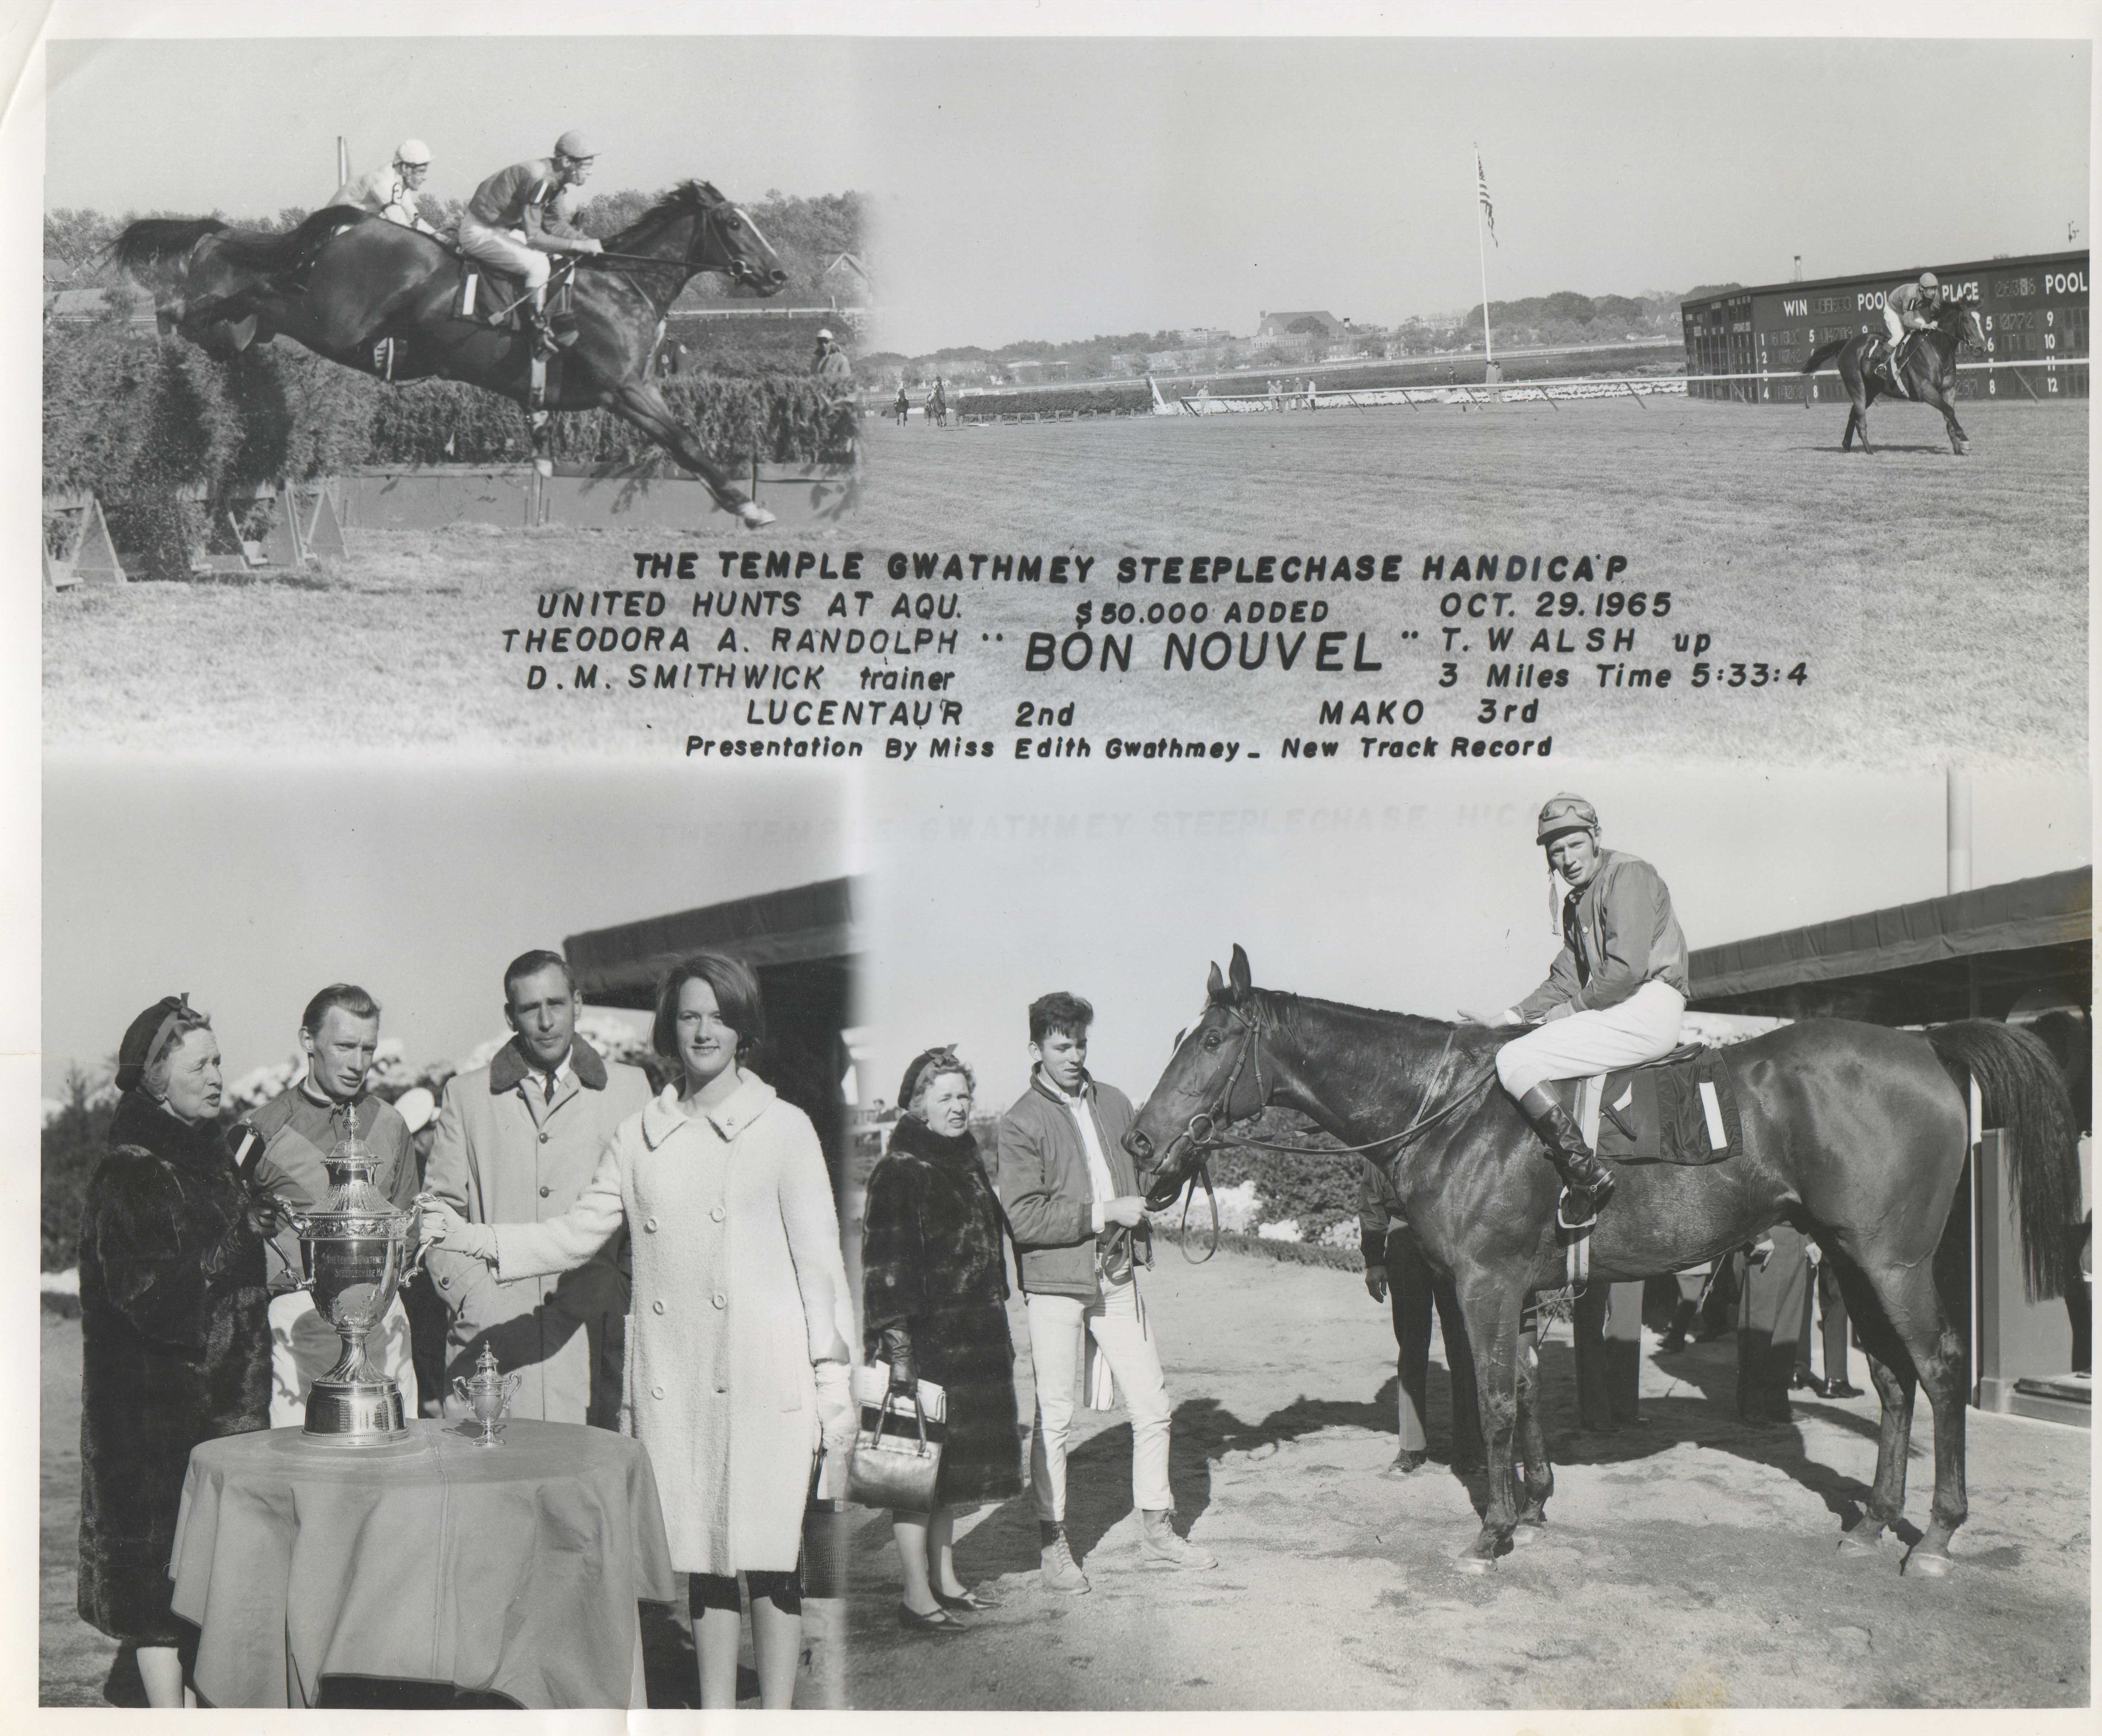 Win composite photograph for the 1965 Temple Gwathmey Steeplechase Handicap at the United Hunts at Aqueduct meet (NYRA/Museum Collection)